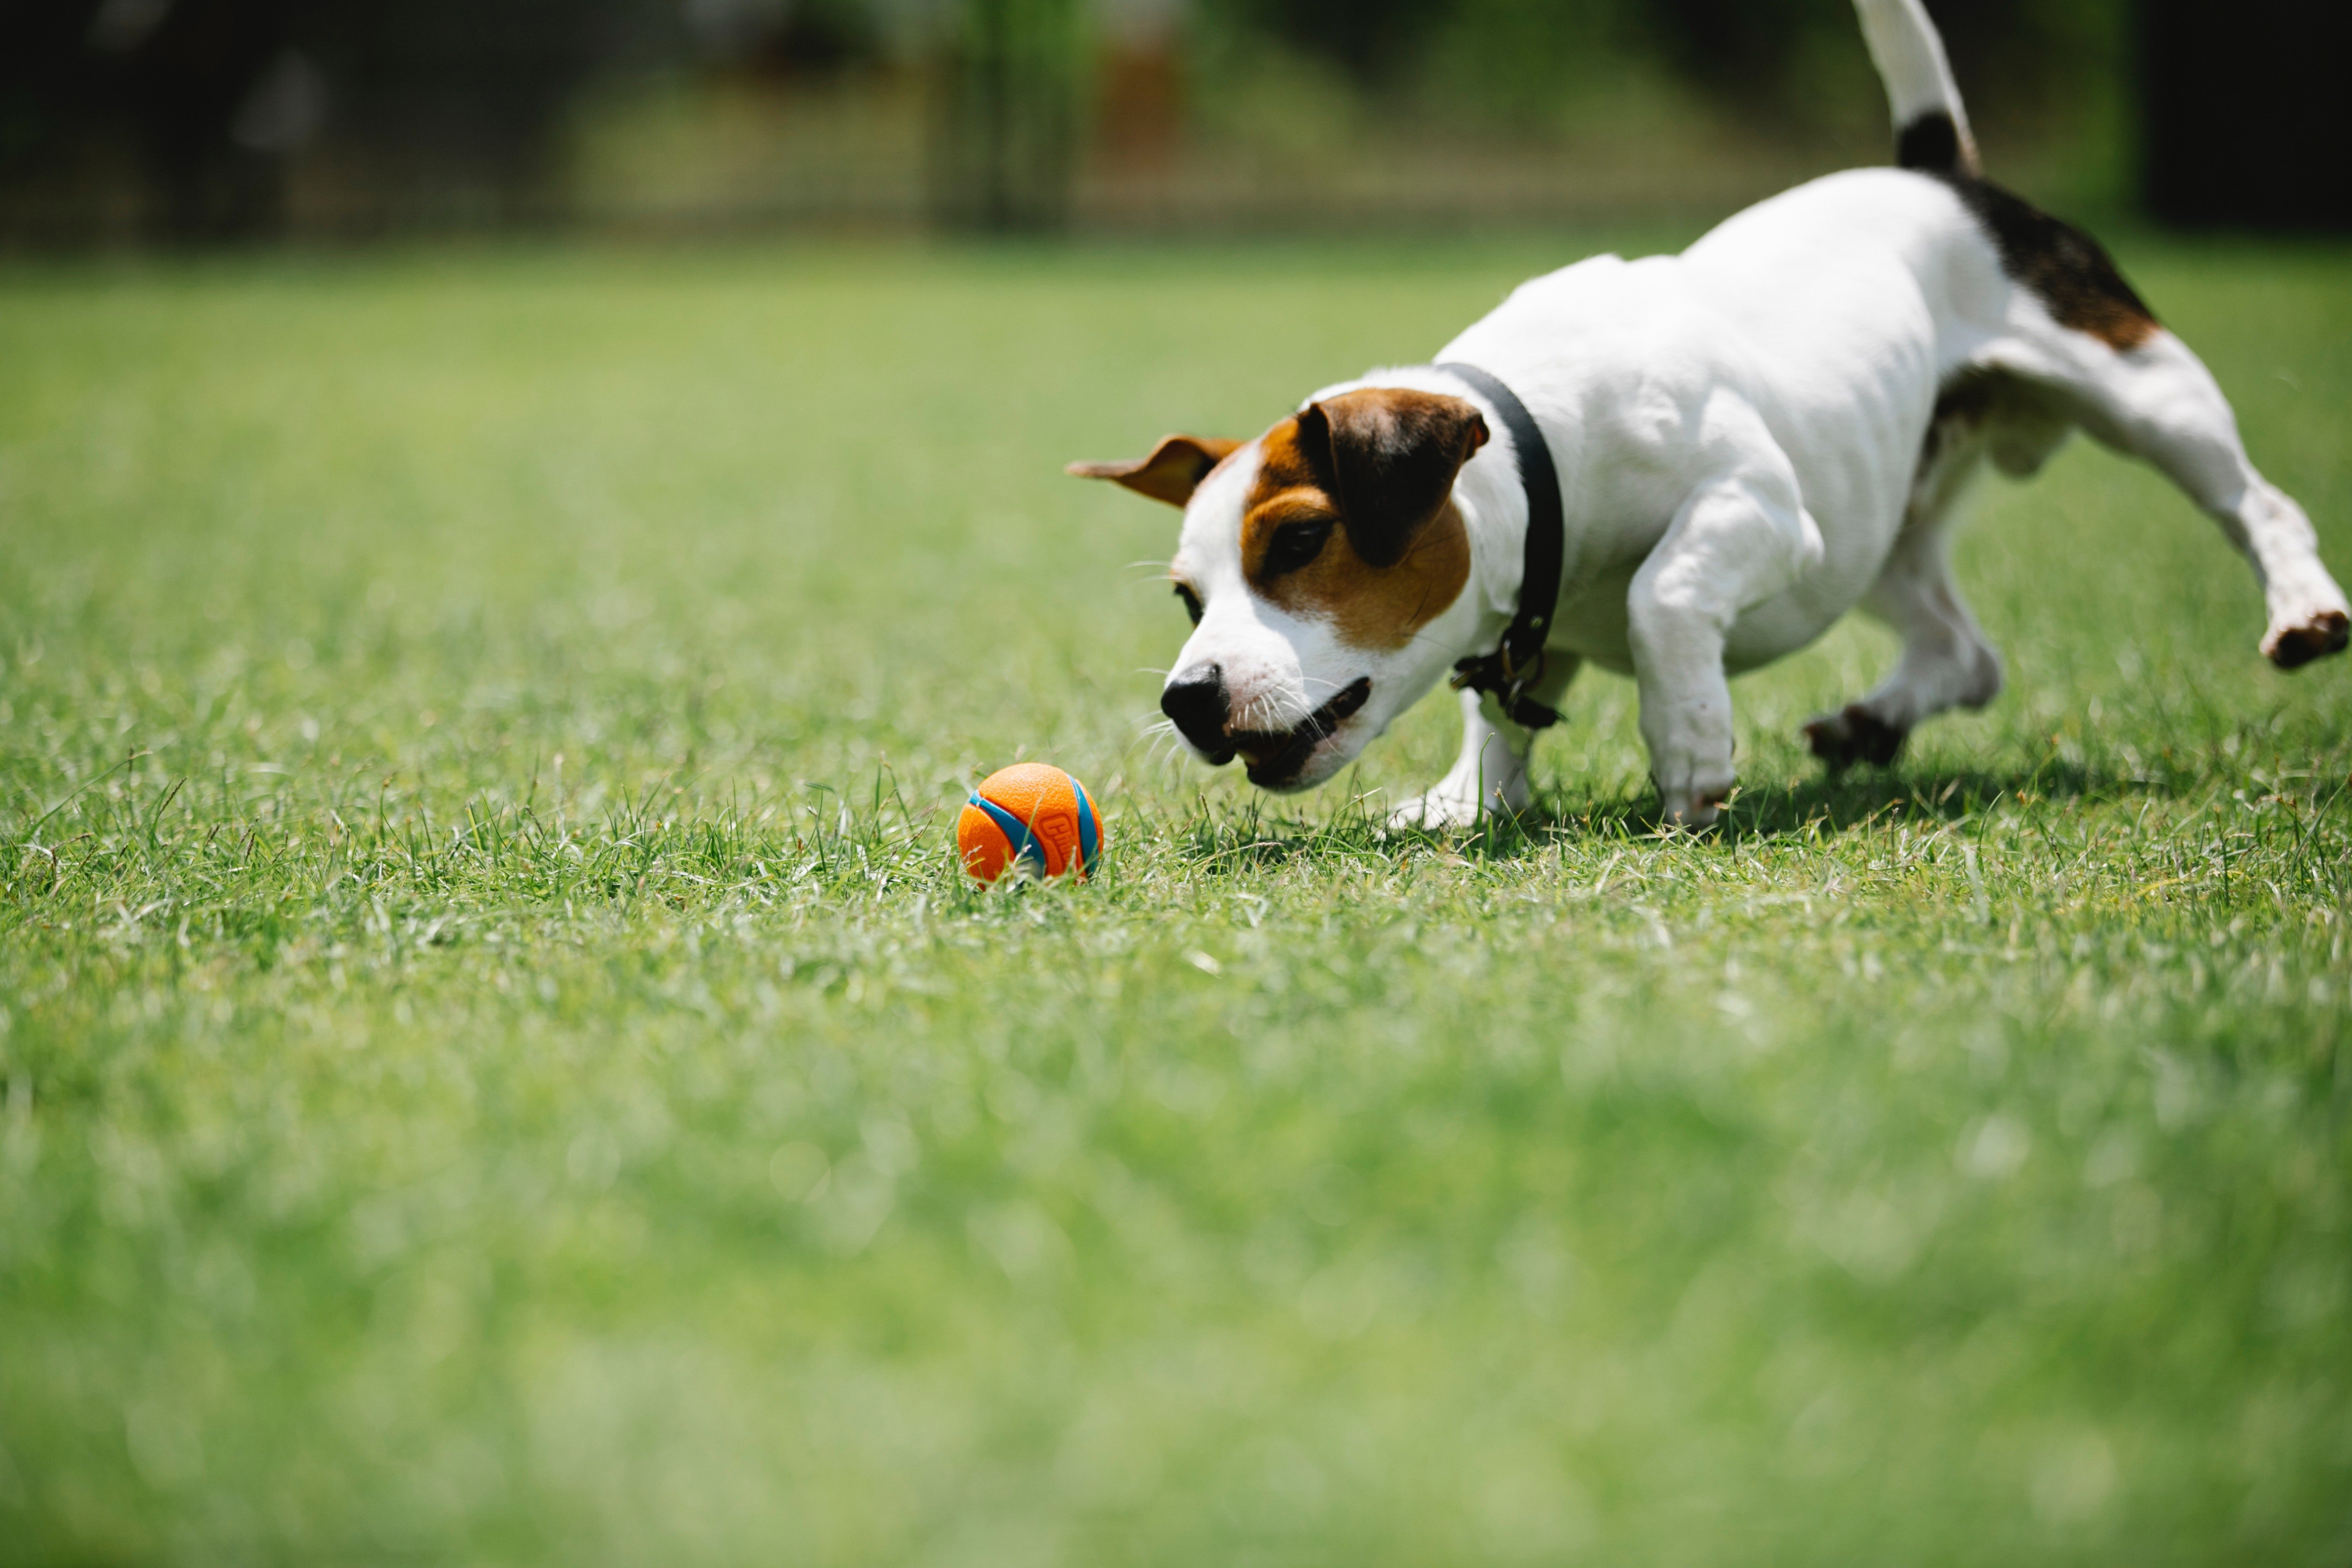 A dog playing with a ball in the lawn. | Photo: Pexels/Blue Bird